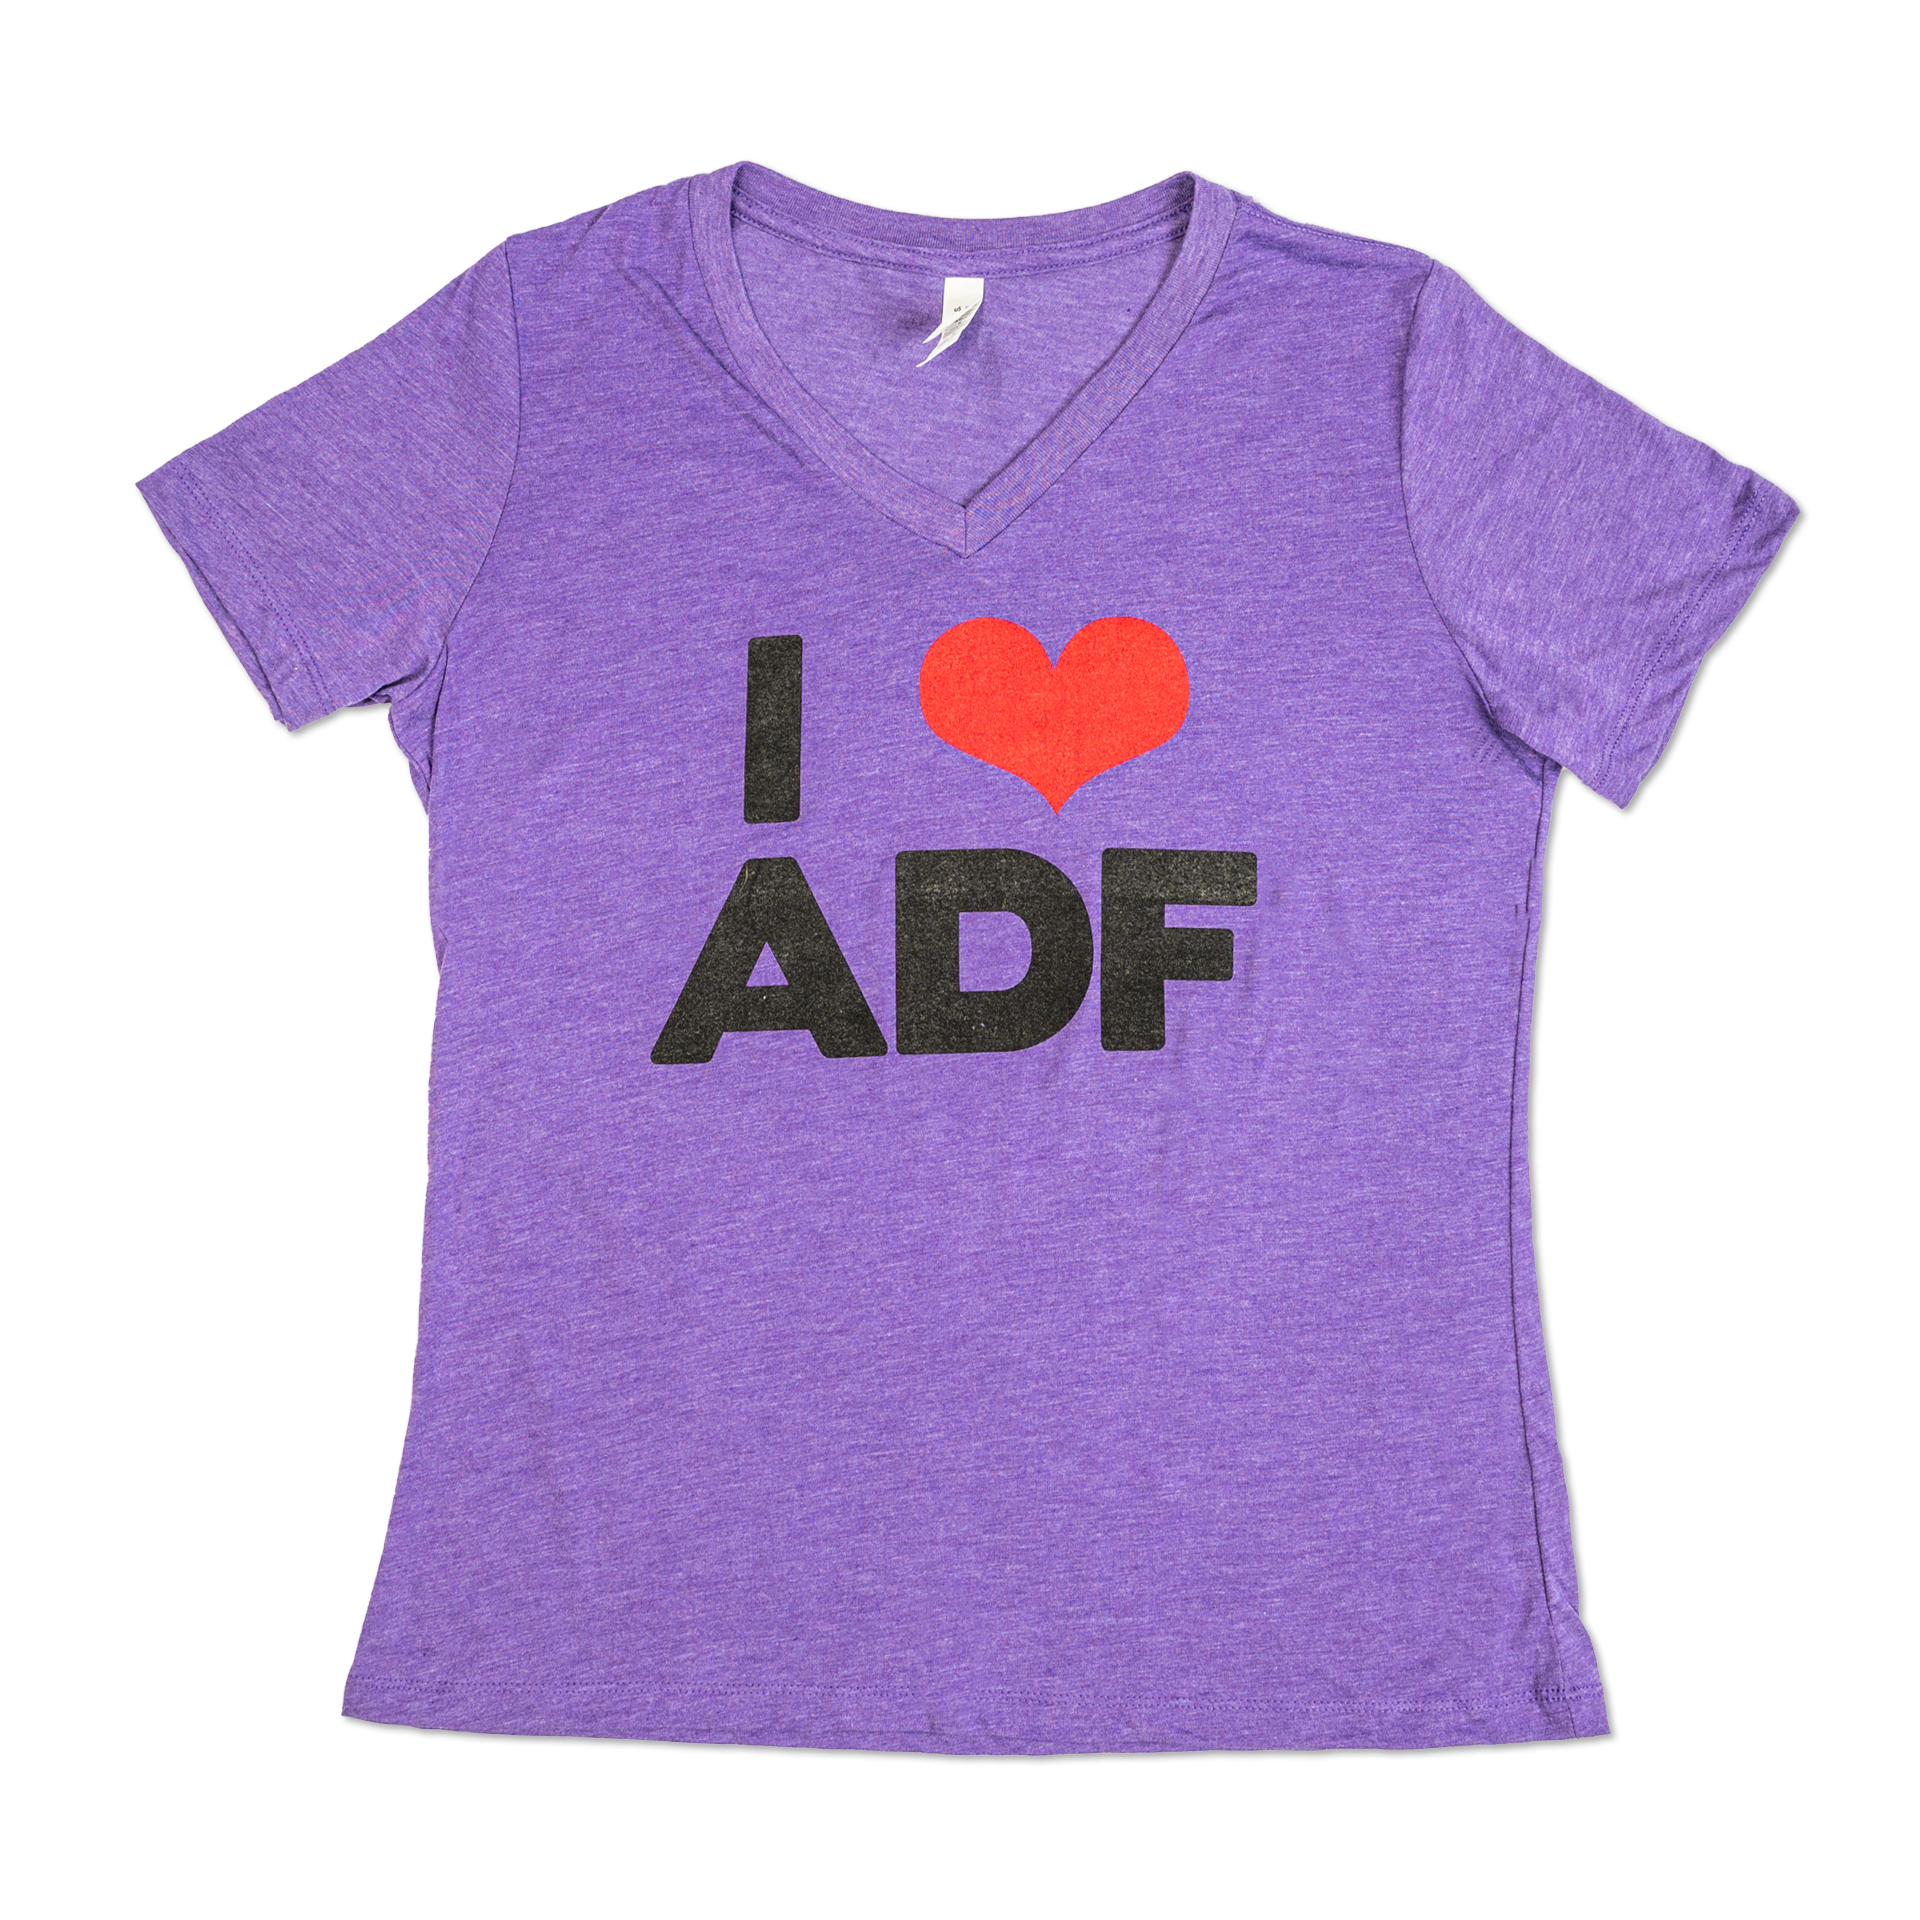 A purple v-neck shirt with I heart ADF printed on it in black and red